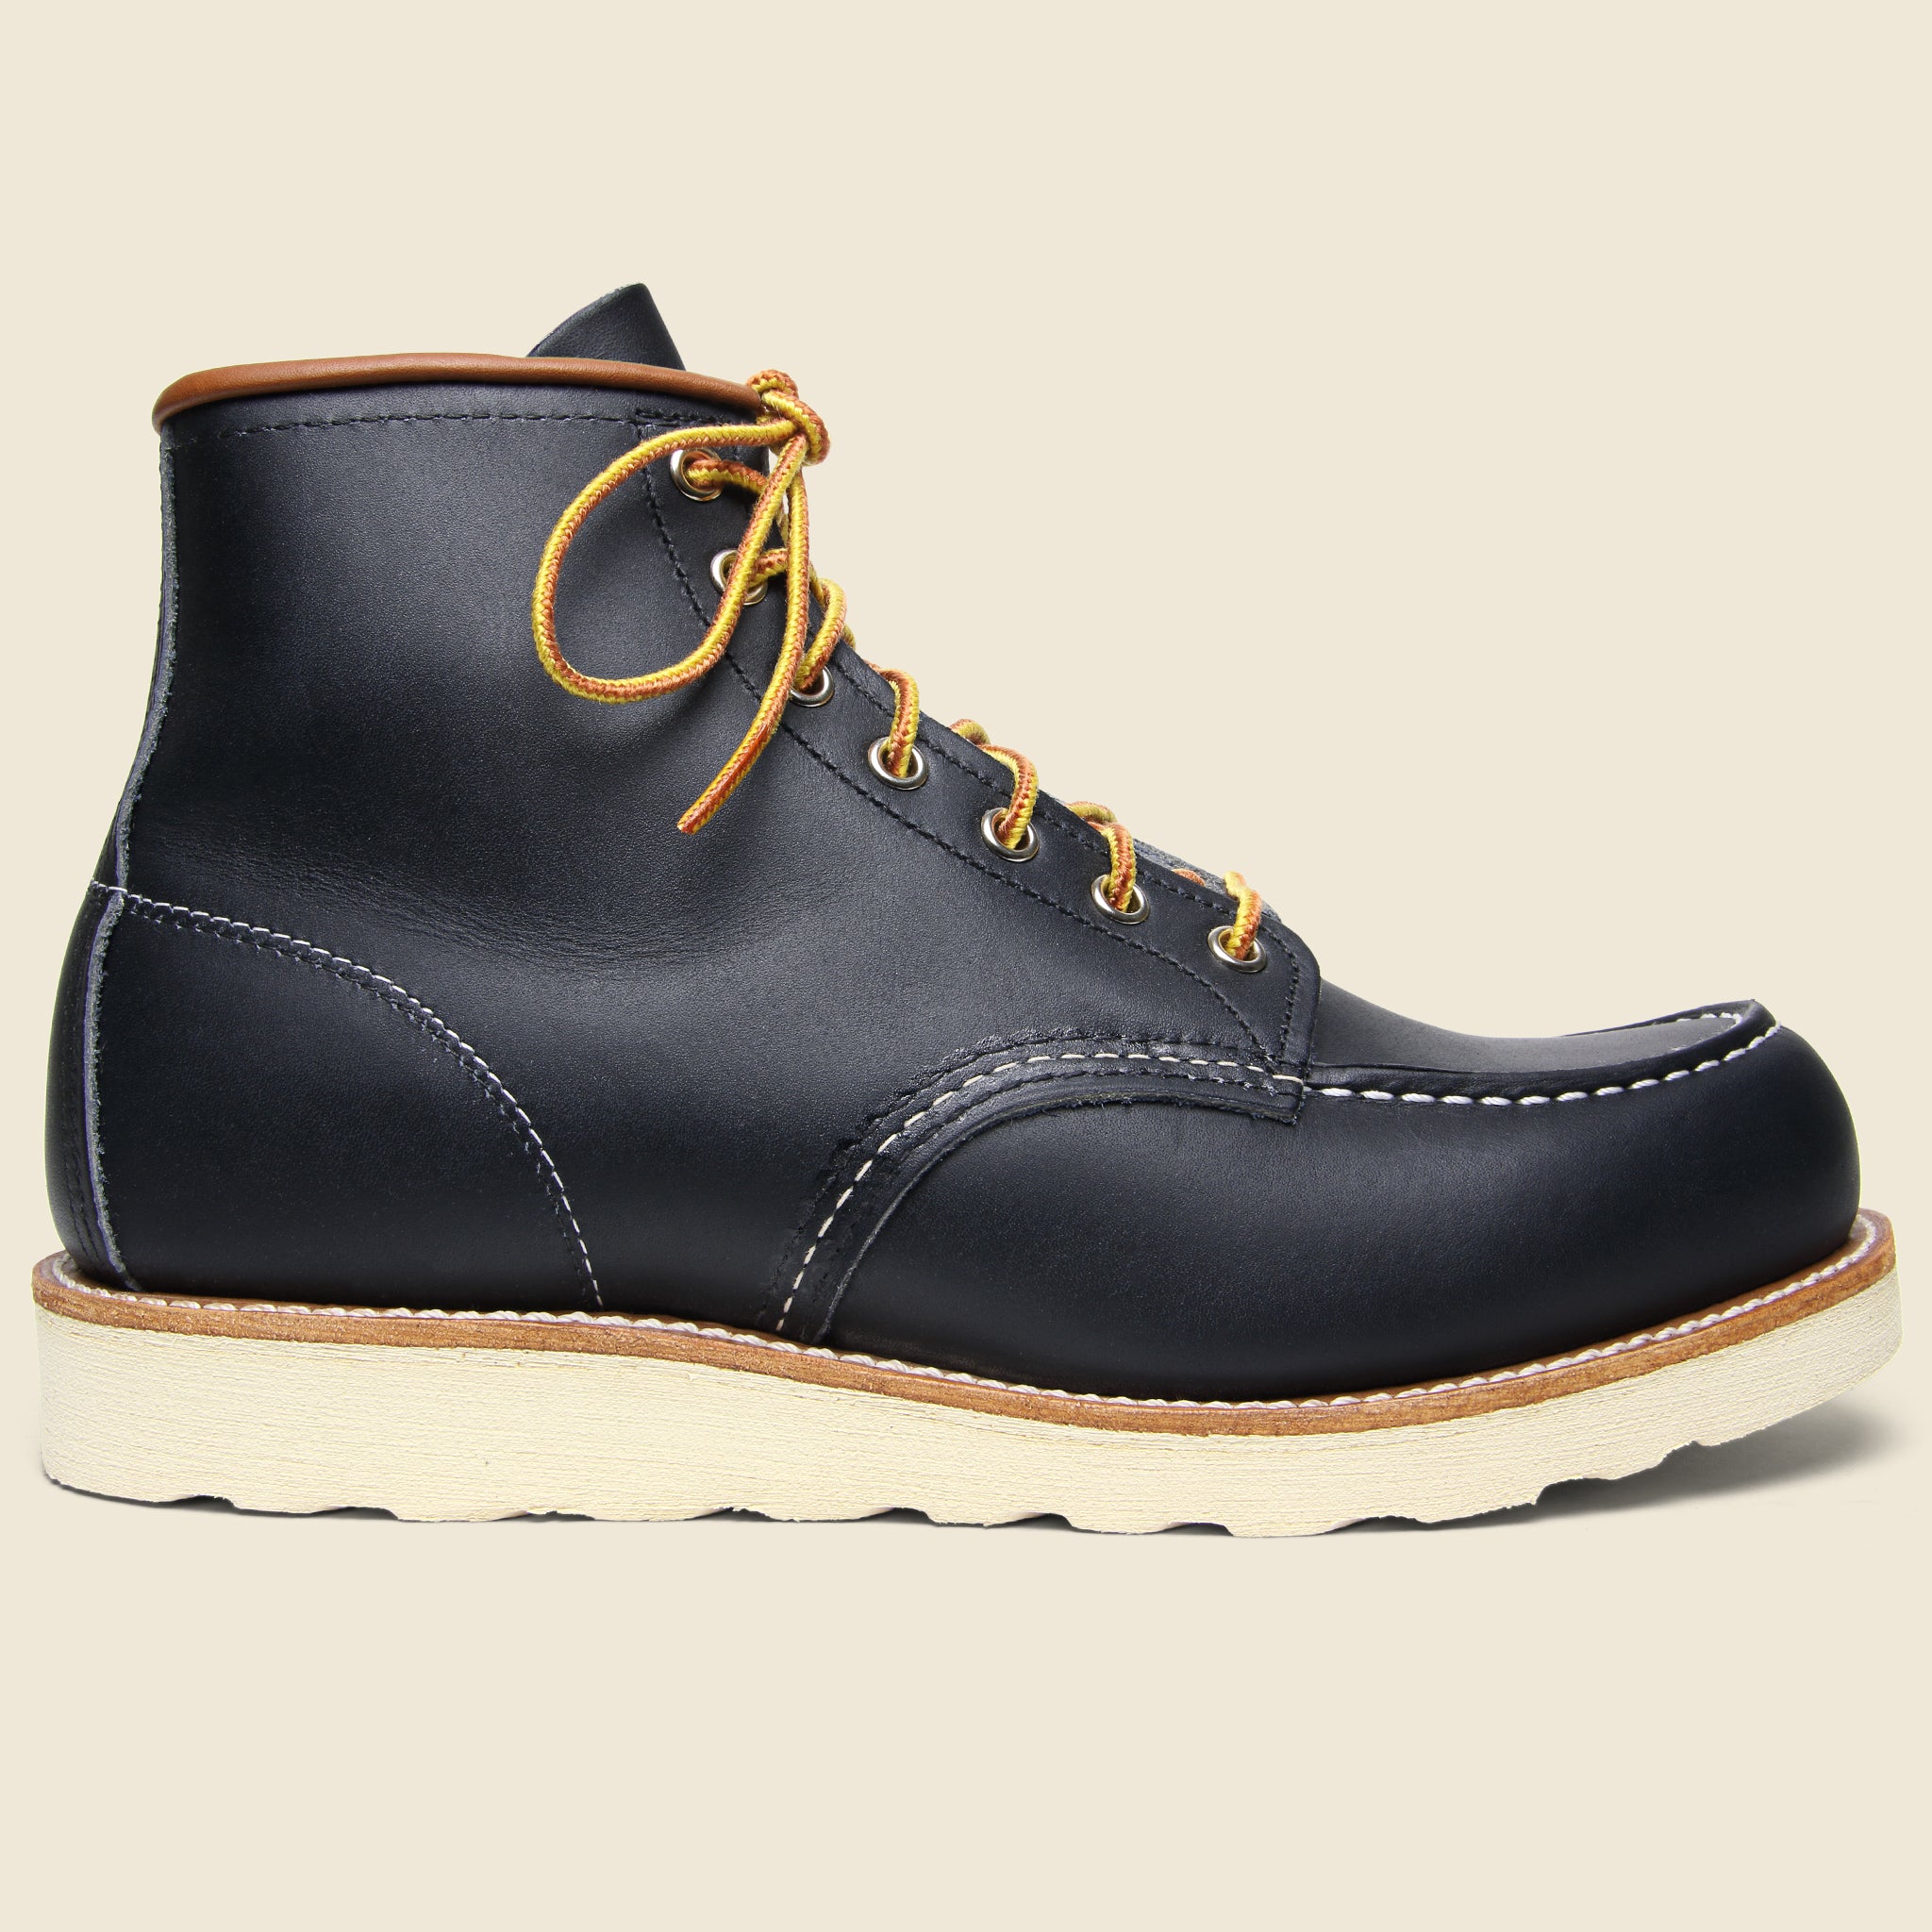 red wing moc toe navy